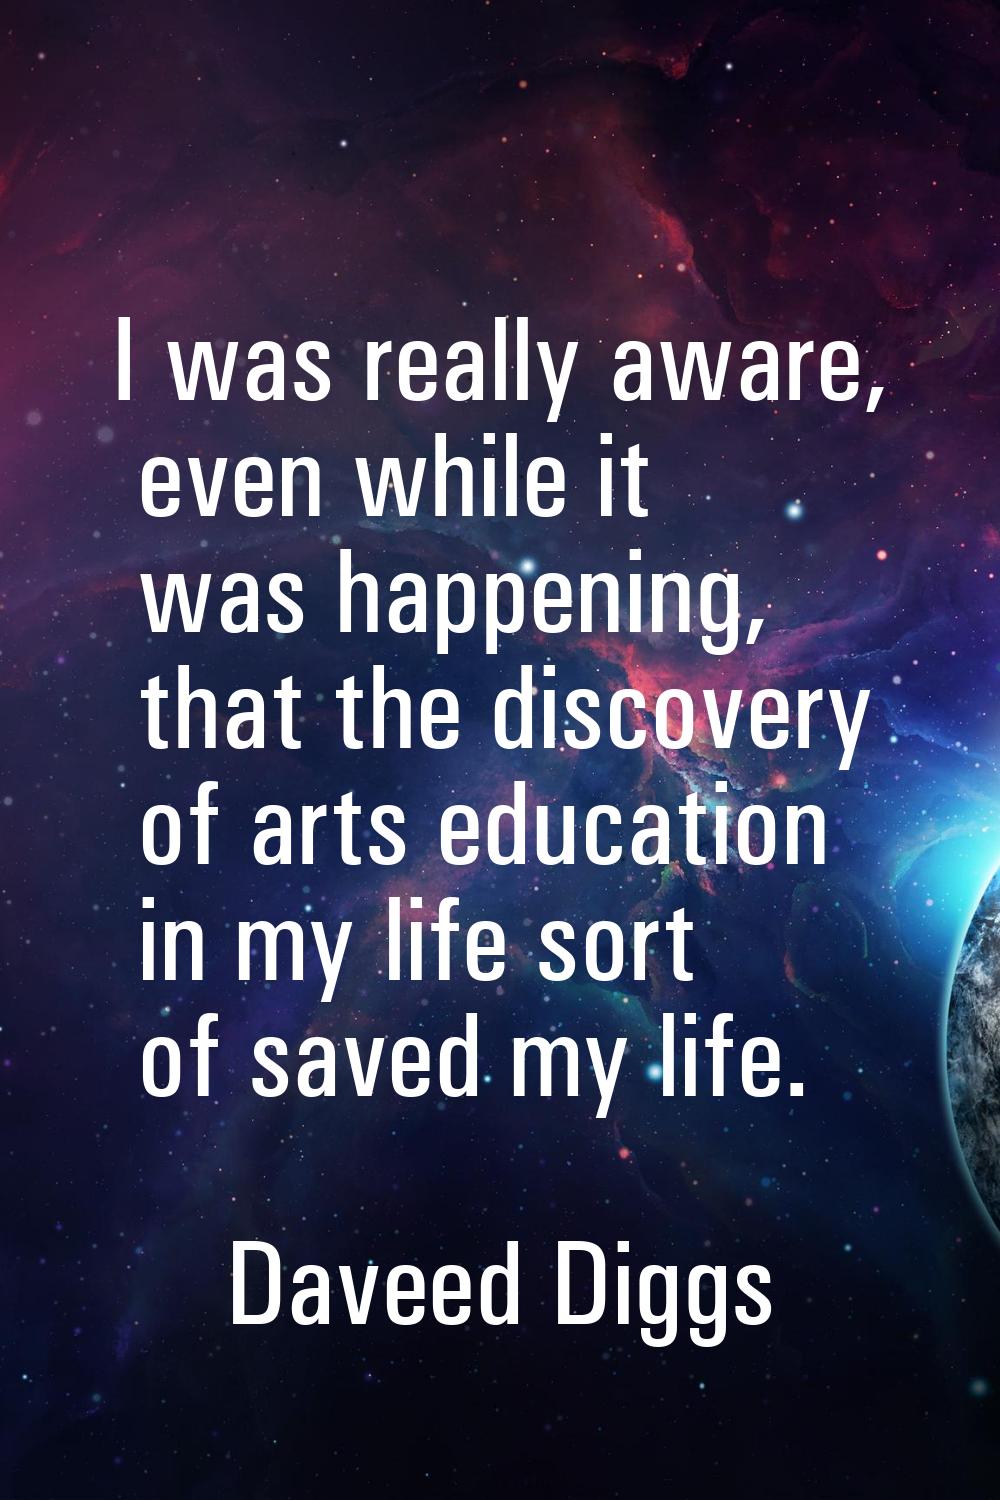 I was really aware, even while it was happening, that the discovery of arts education in my life so